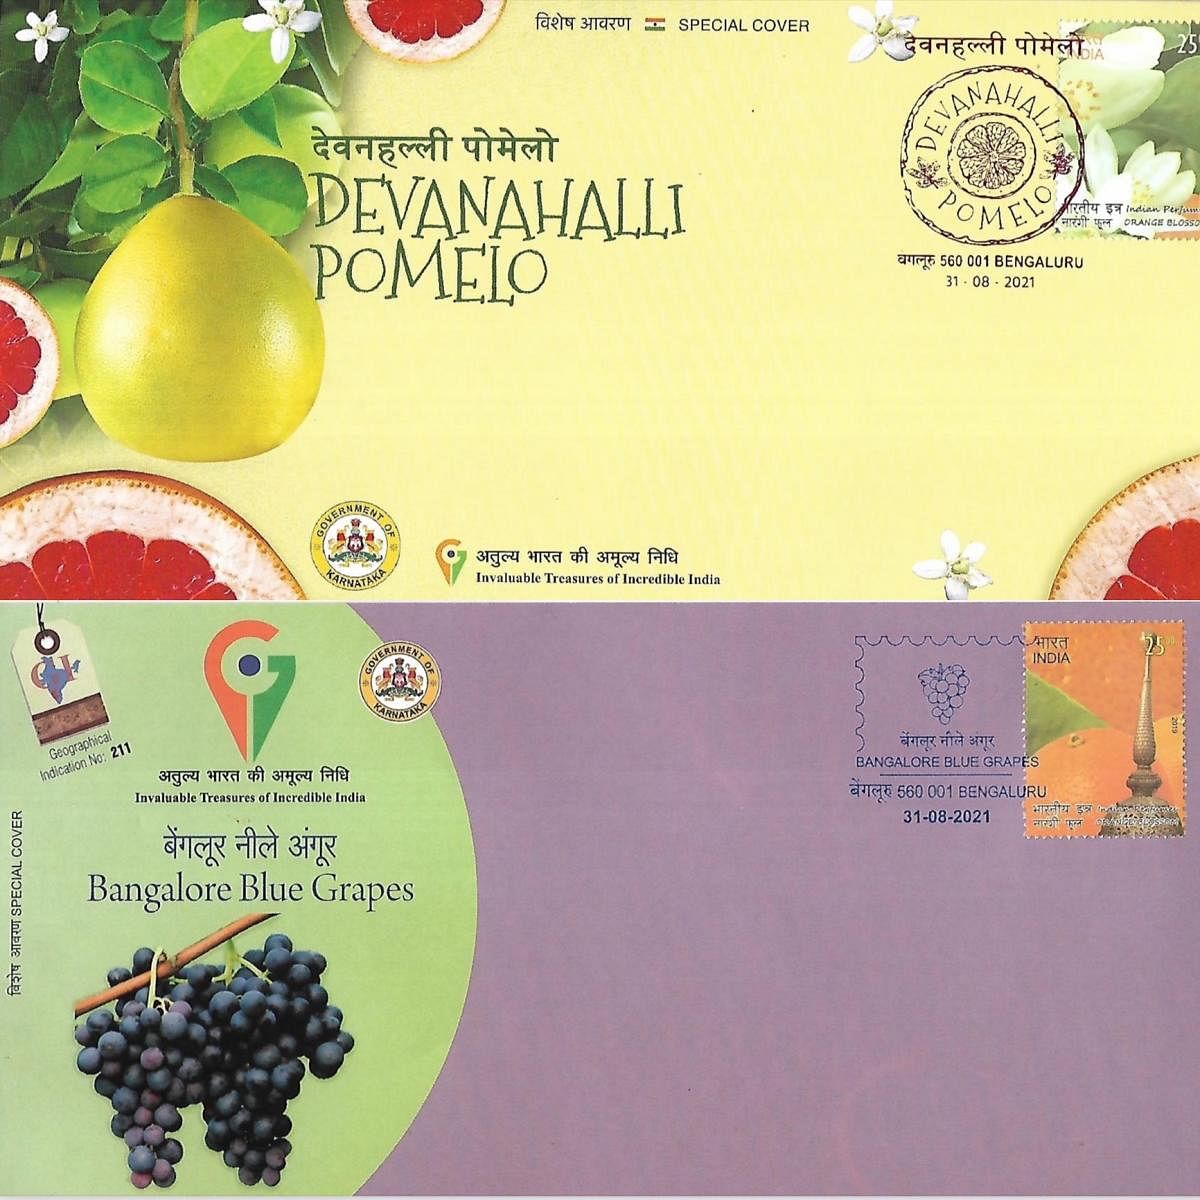 Bengaluru products with GI tags now on postal covers